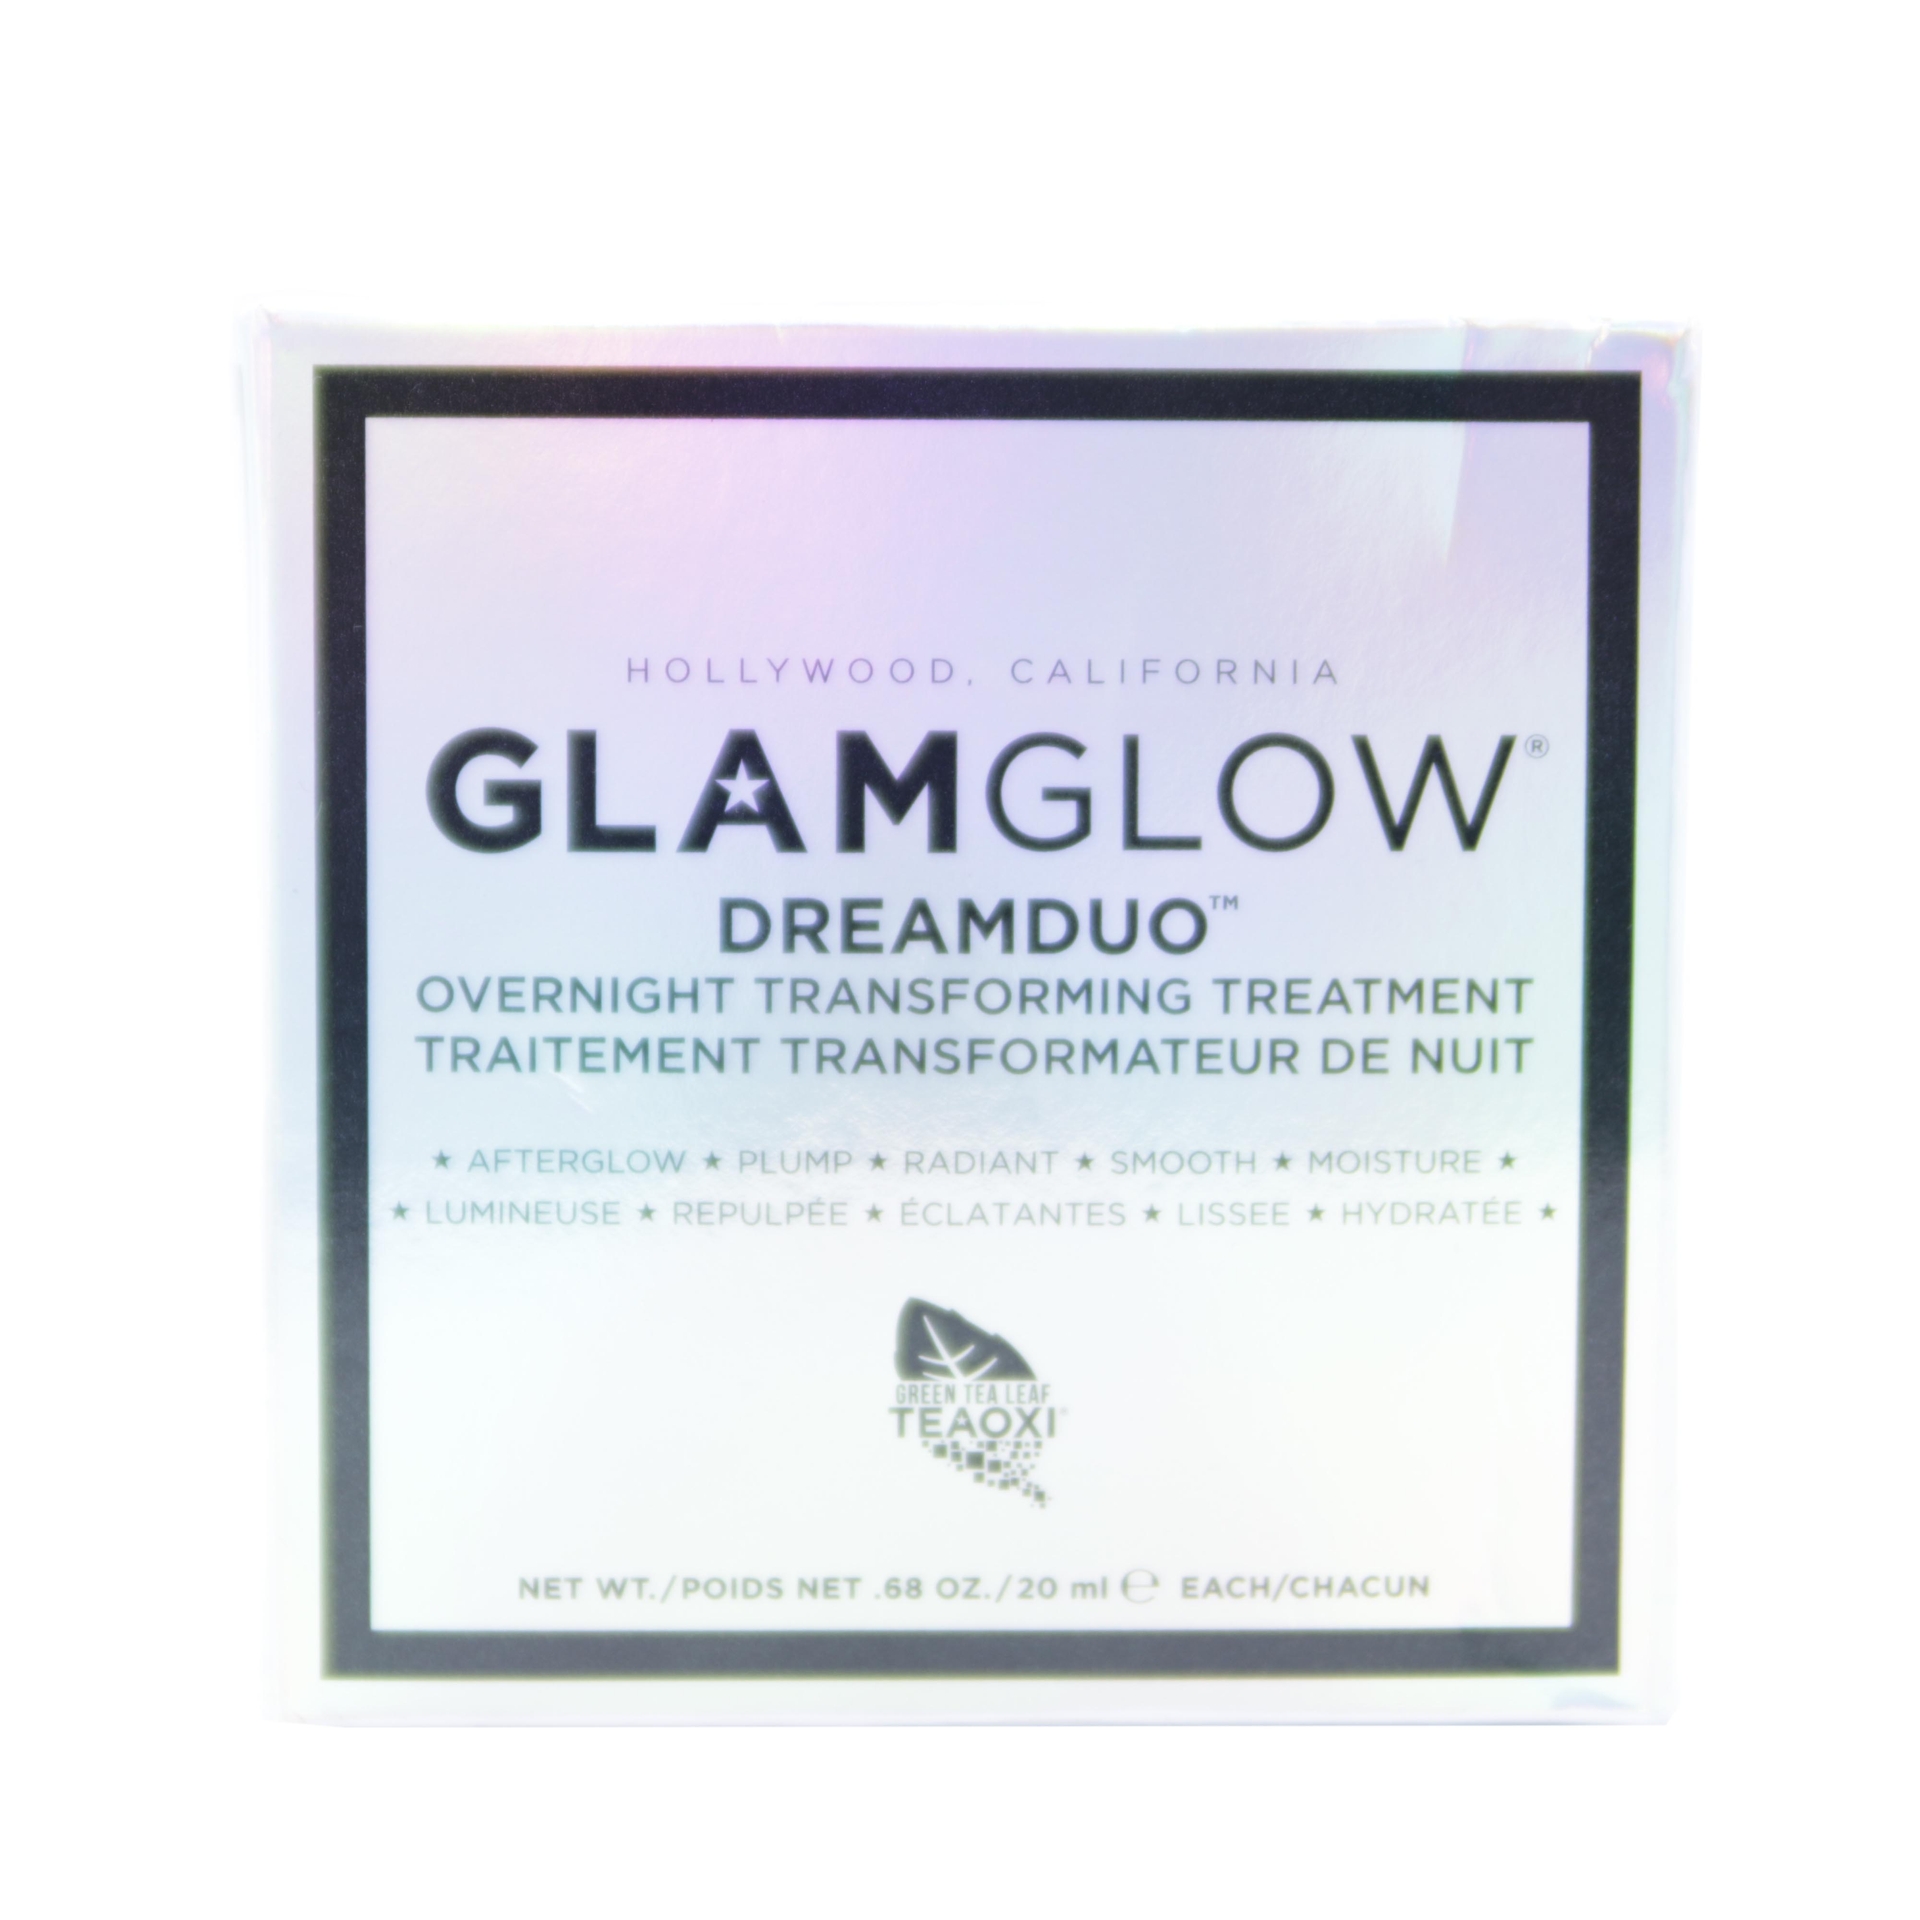 Glamglow Dream Duo Overnight Transforming Treatment Skin Care